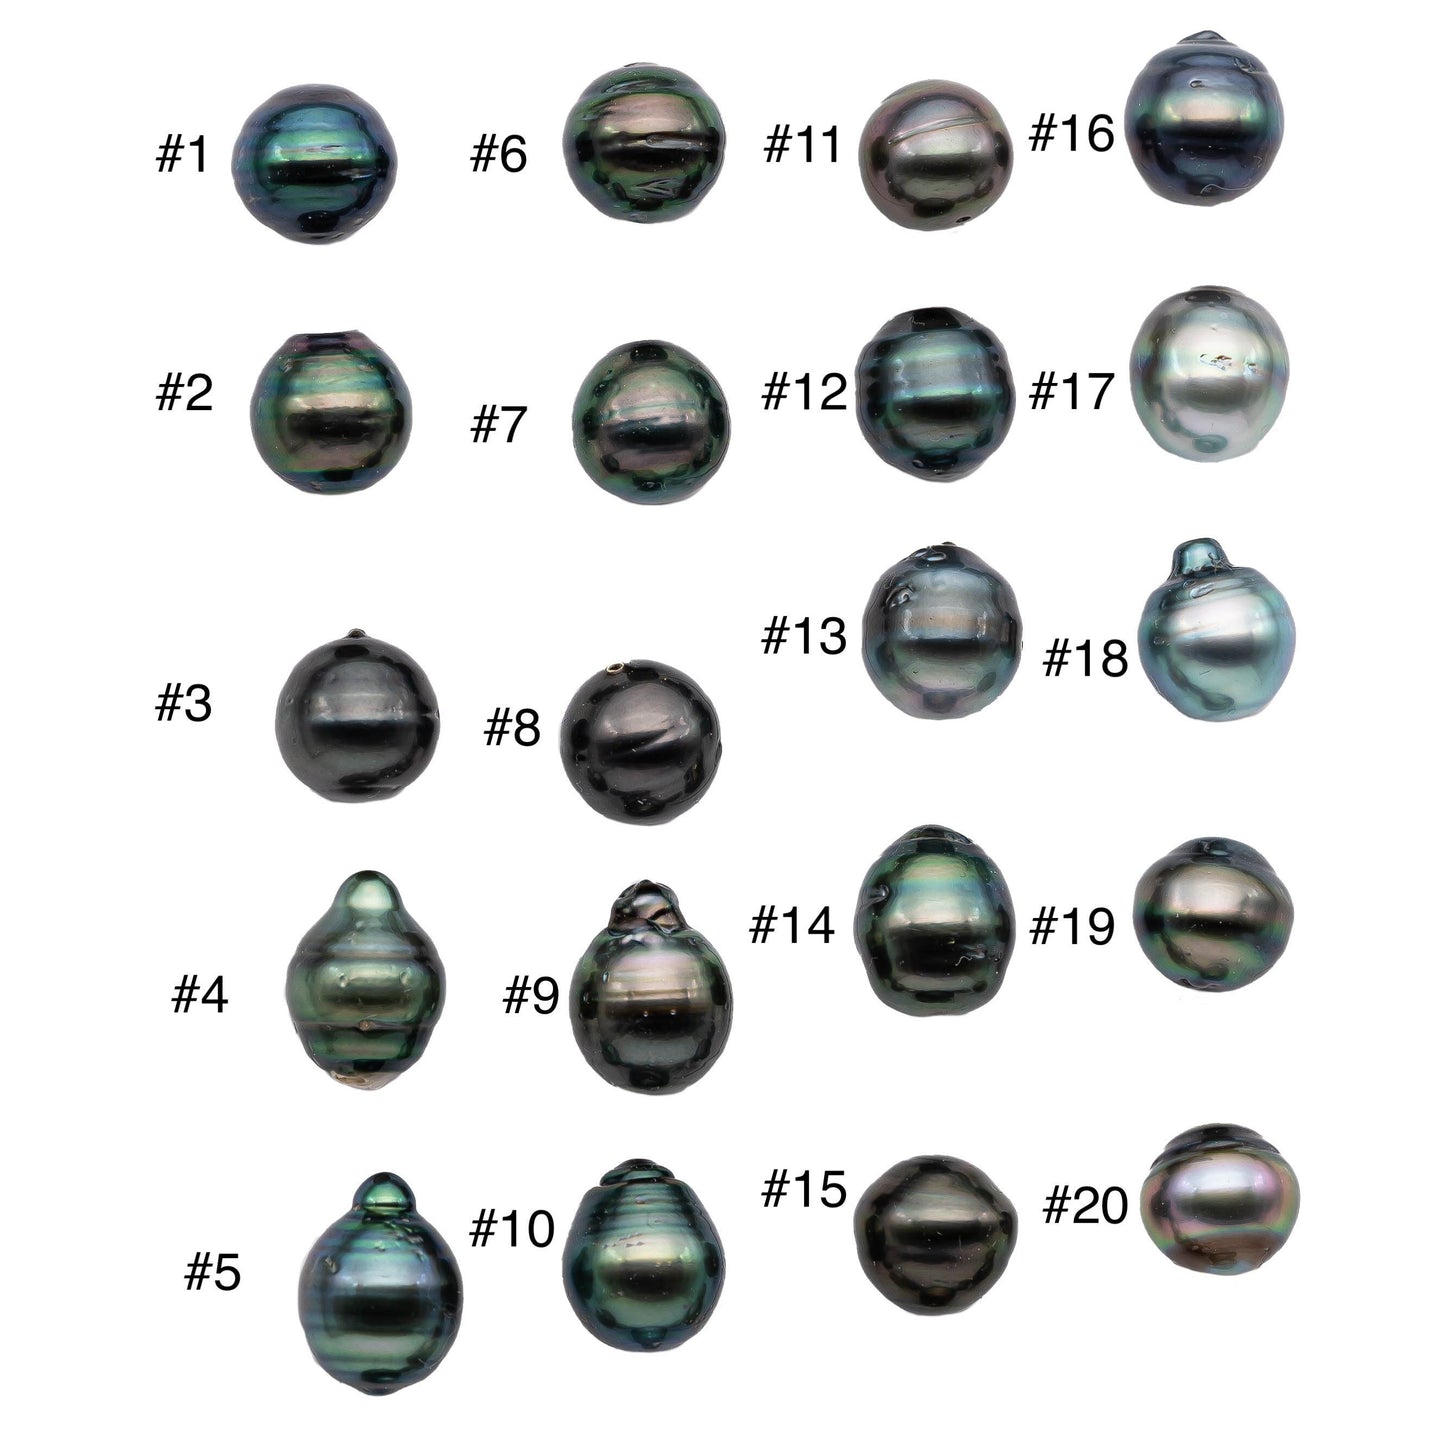 One Piece Tahitian Pearl Drops with Natural Color in Single Loose Undrilled Black Pearl with High Luster and No Hole 11-11.5mm, SKU # 1127TH